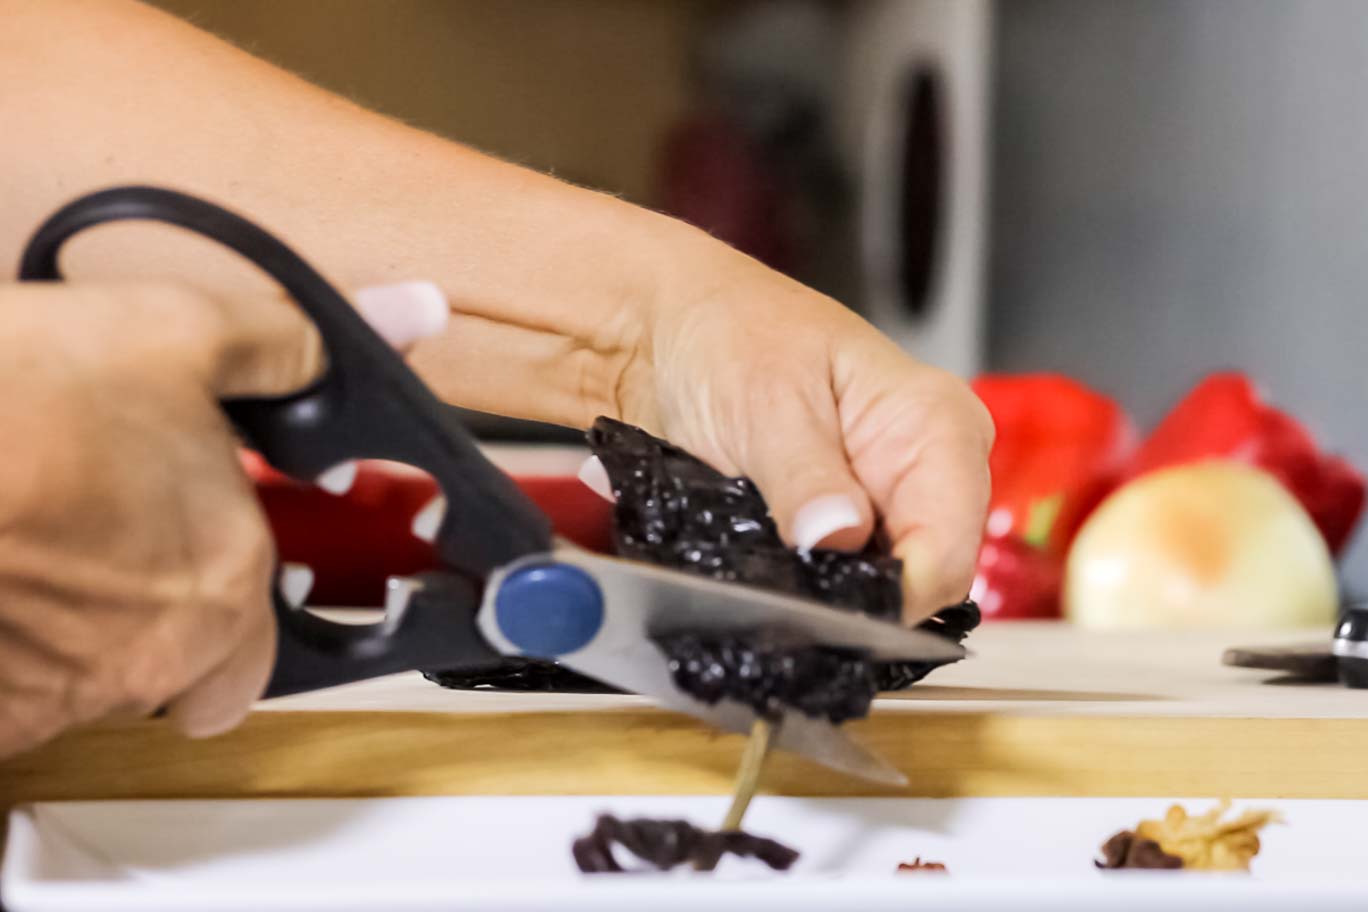 Cutting the stem off of a dried chili pepper with Henckels kitchen sheers